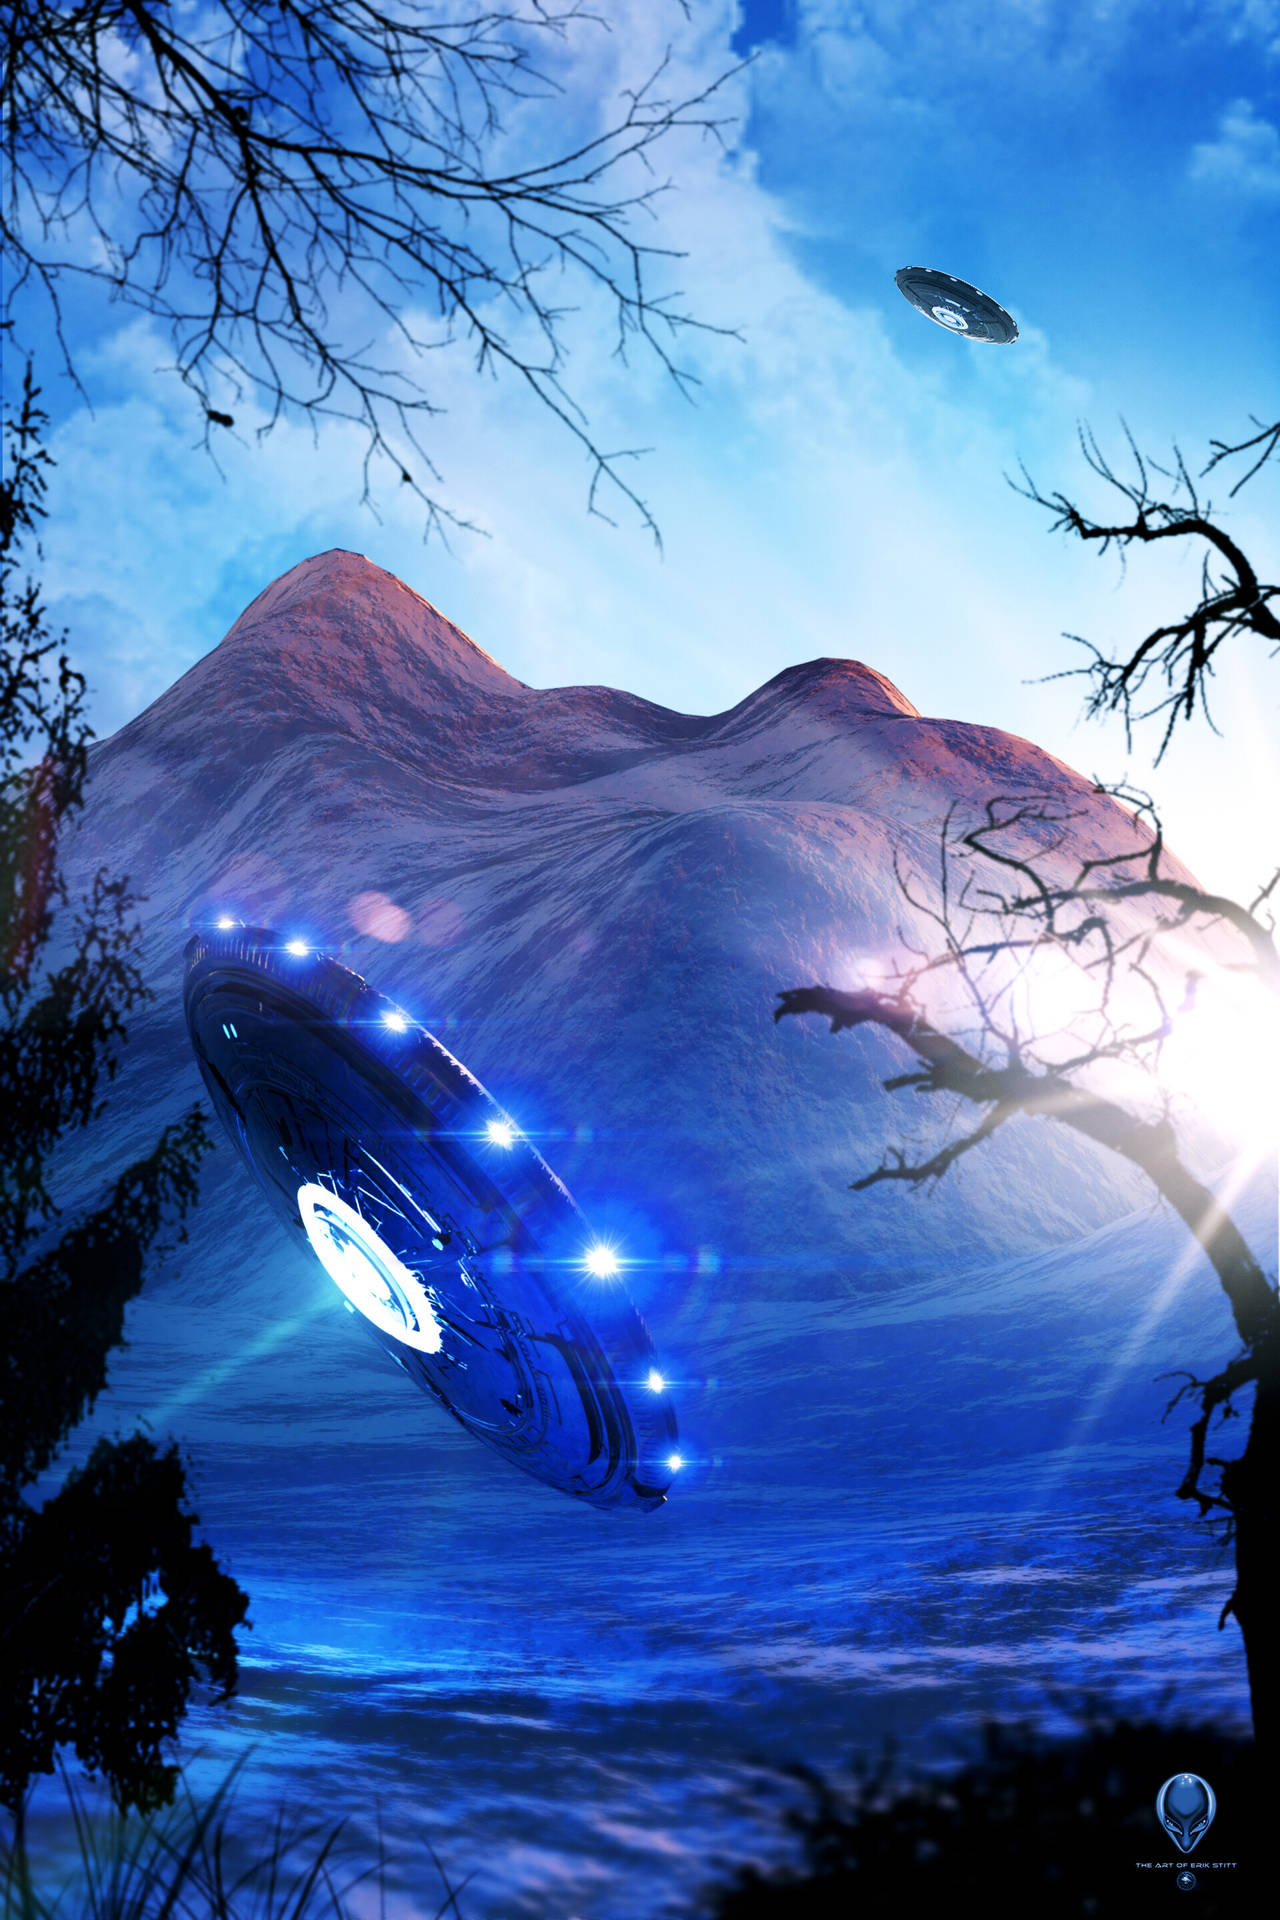 A Mysterious Alien Spaceship Lurking in the Mountains Wallpaper